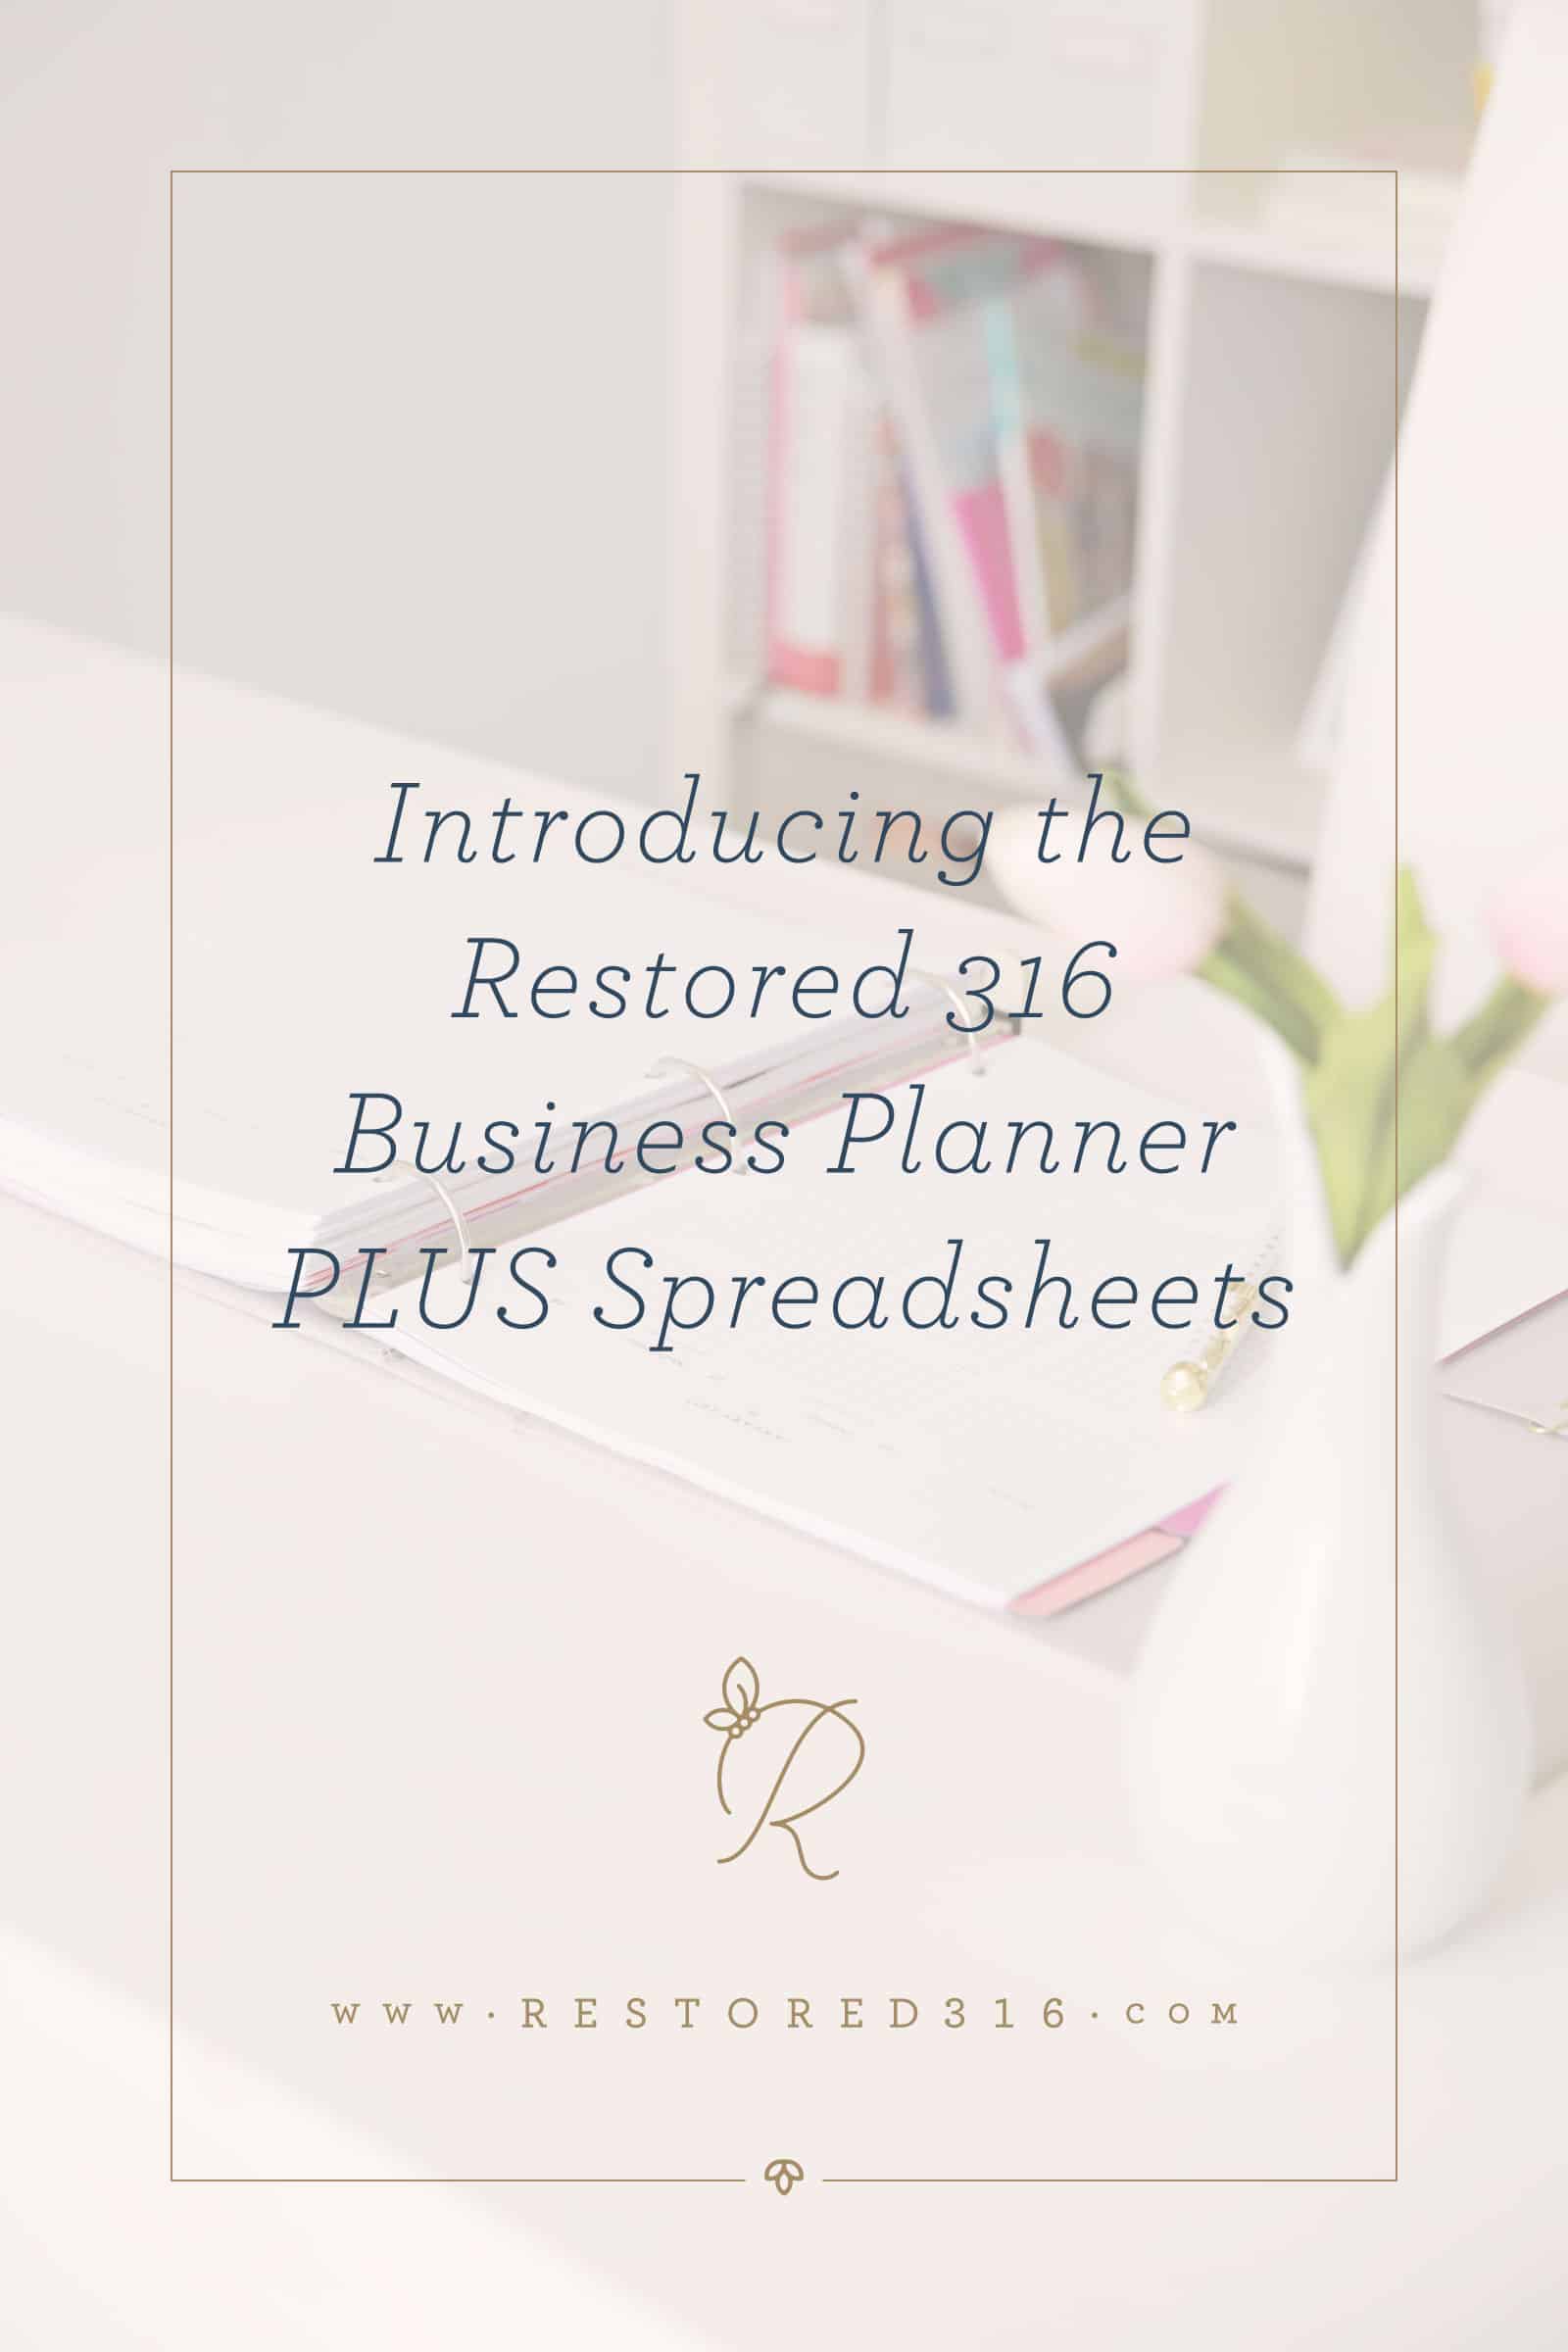 Introducing the Restored 316 Business Planner